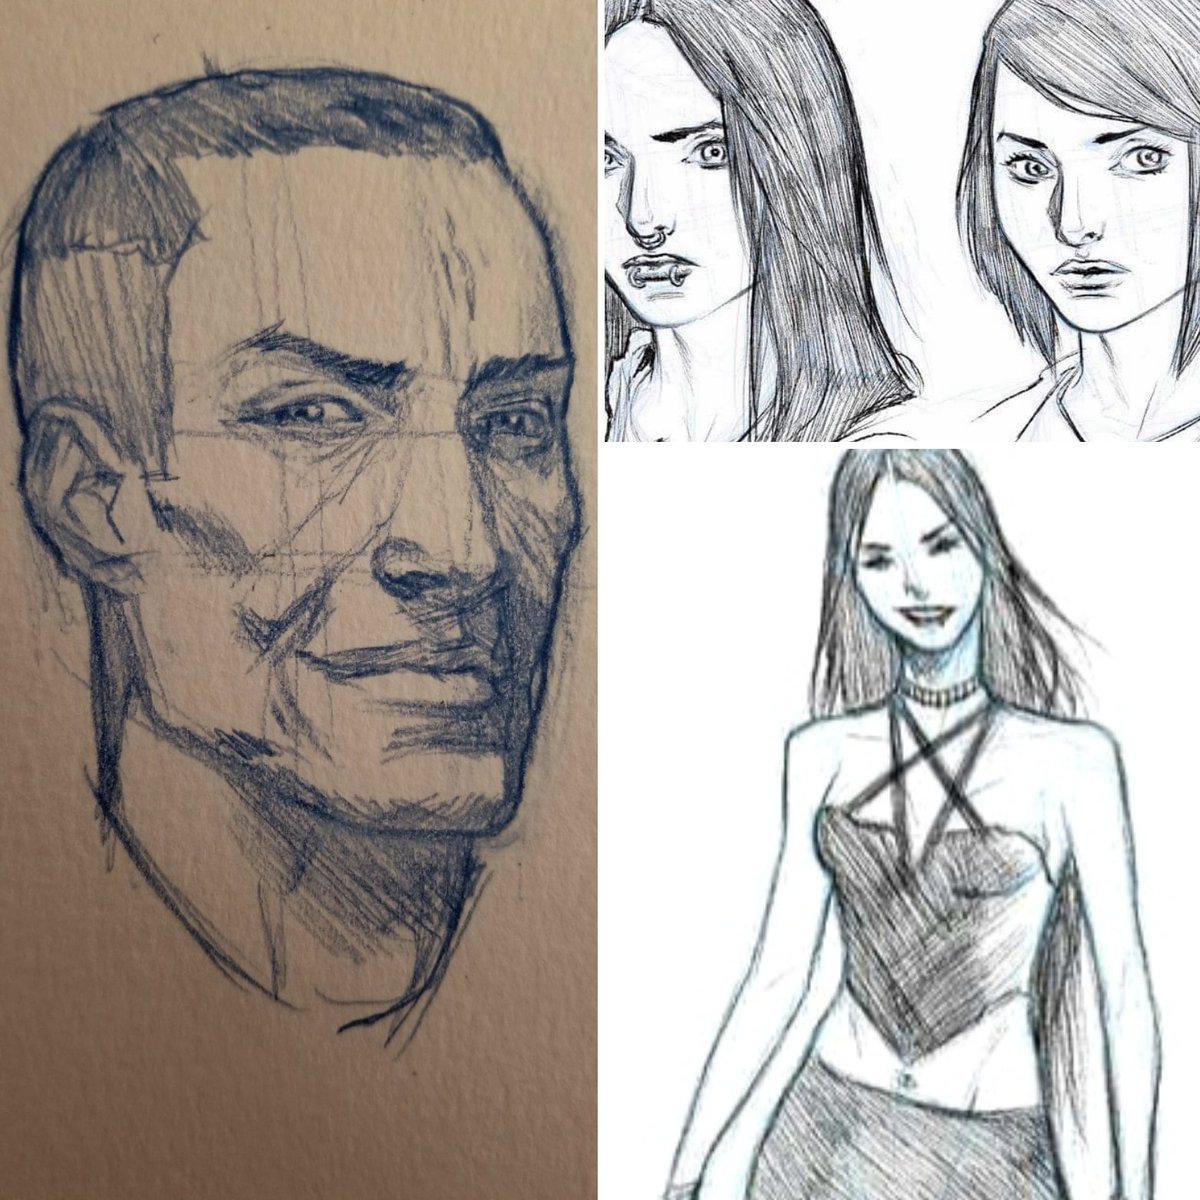 Finishing up some character designs. #makecomics #drawing 